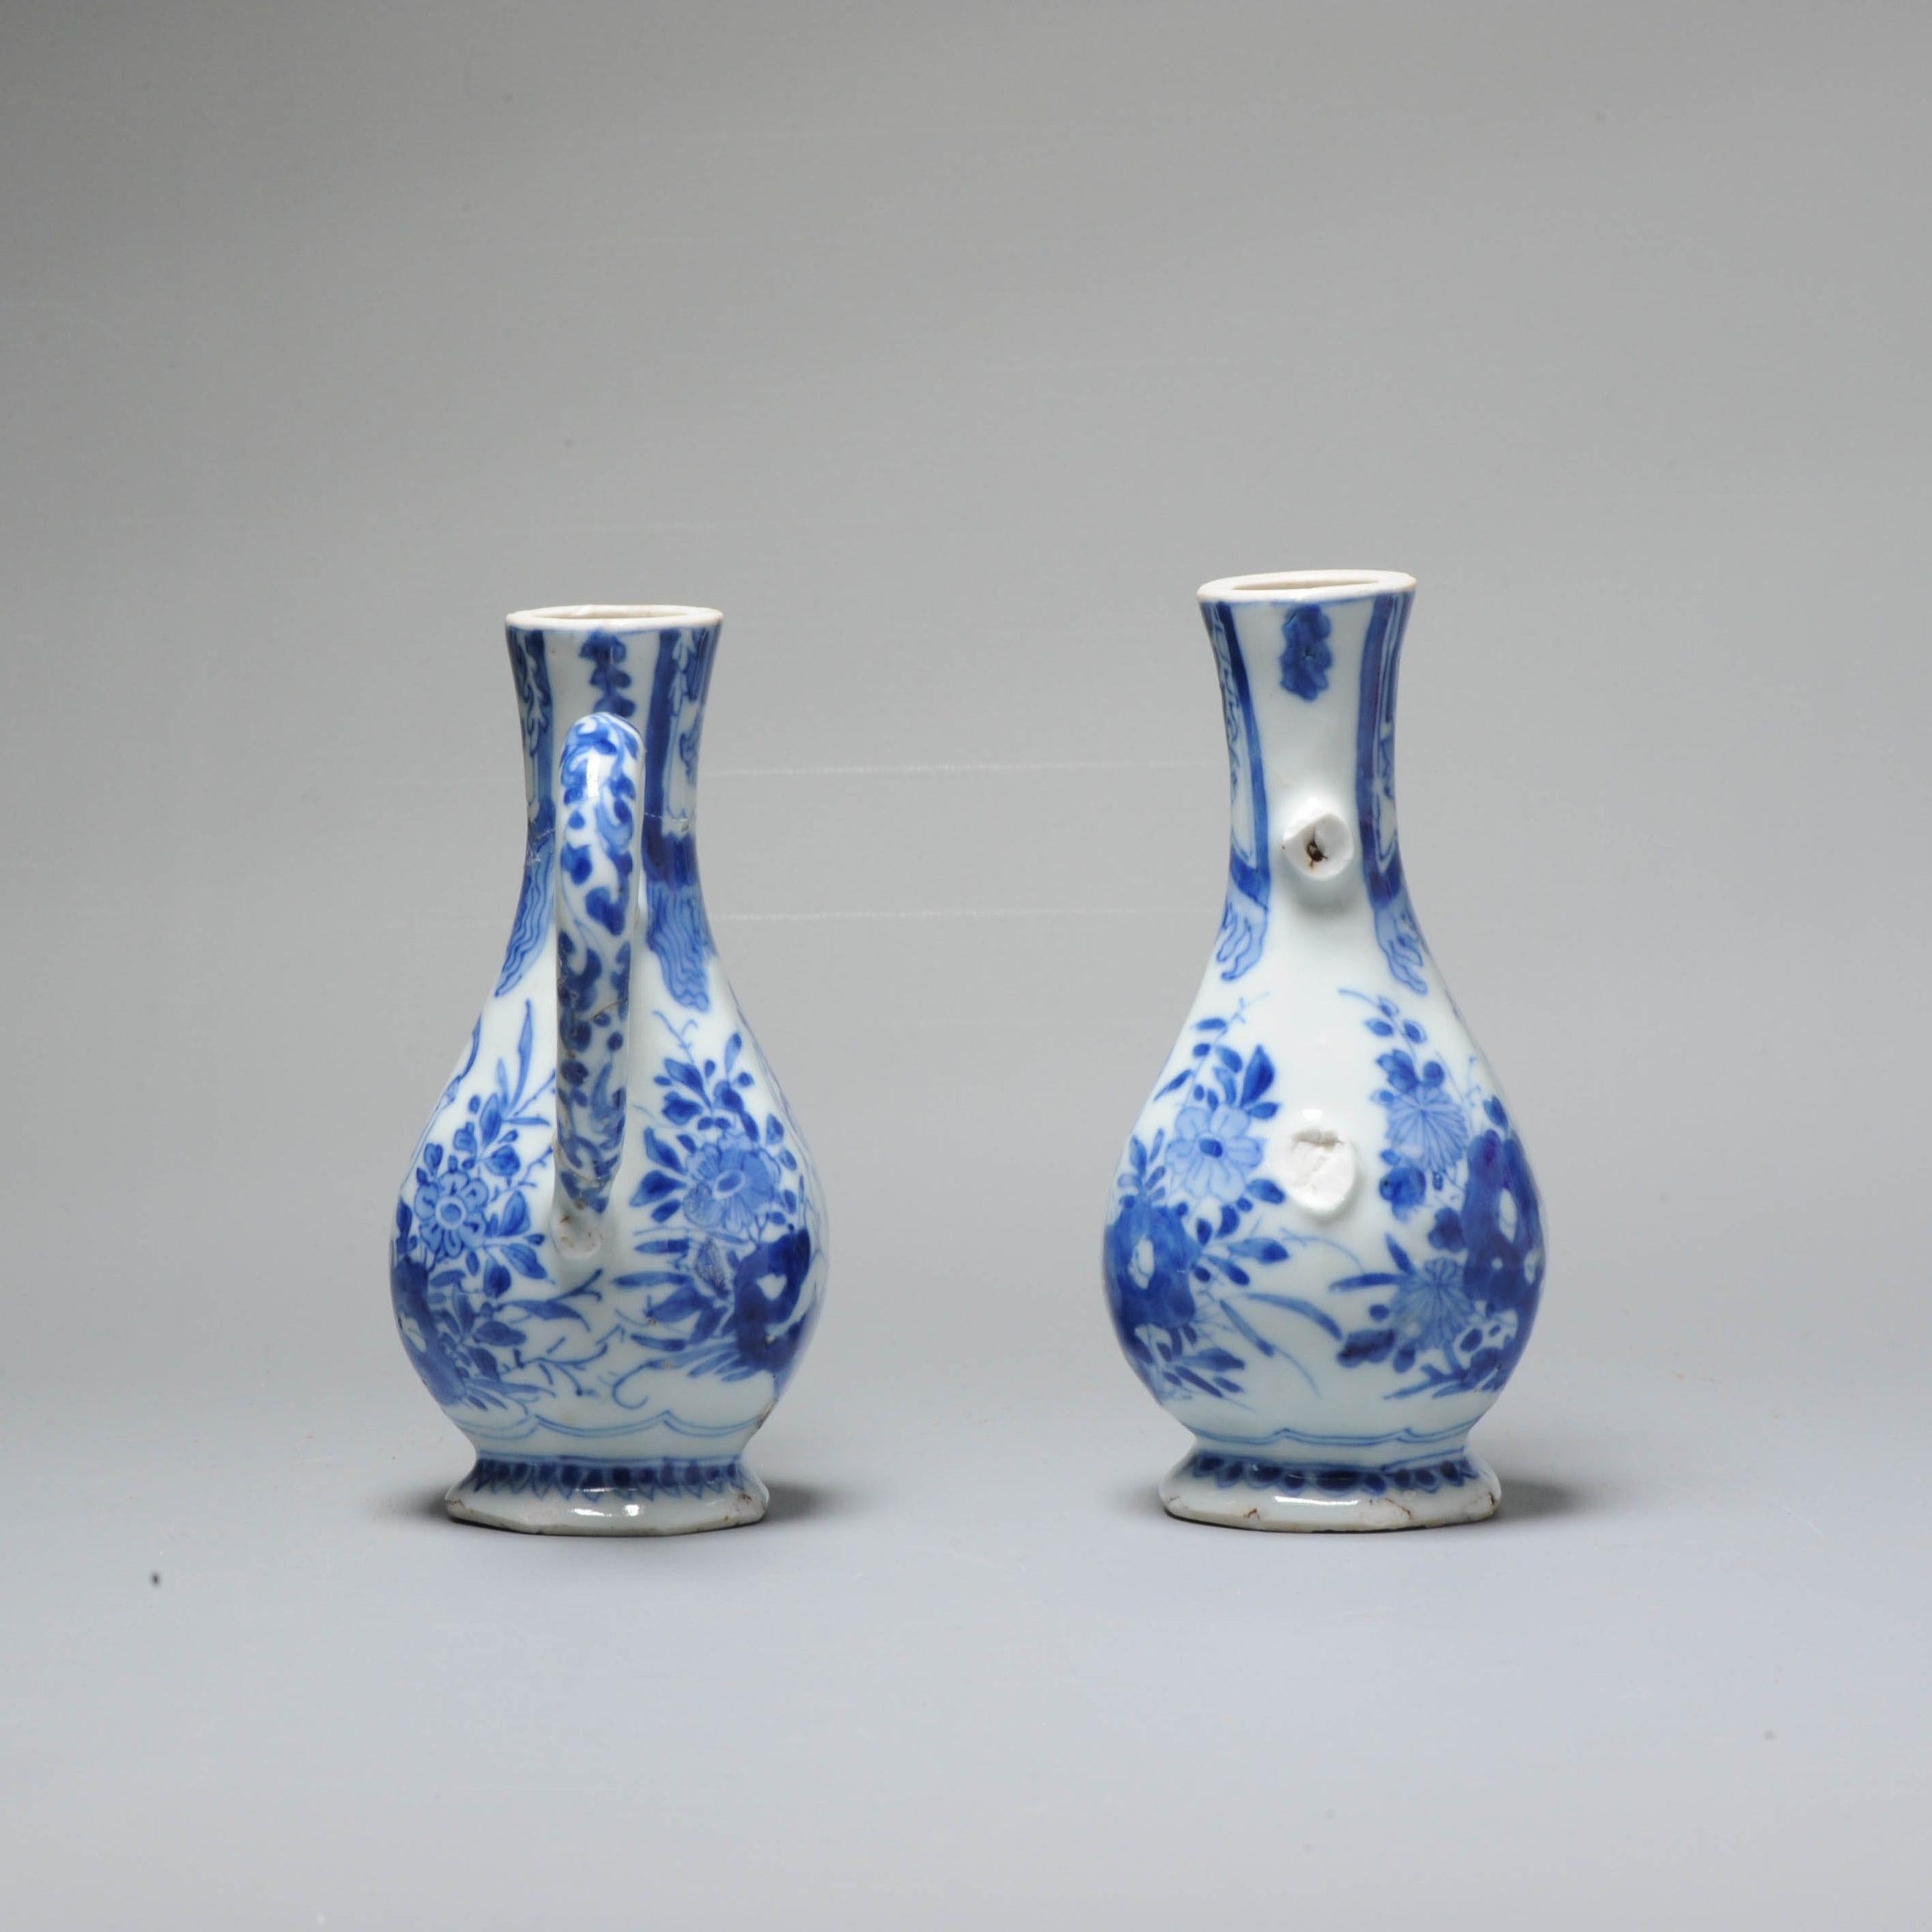 Rare Kangxi Chinese Porcelain Adam and Eve Ewers, Period 1662-1722 In Fair Condition For Sale In Amsterdam, Noord Holland